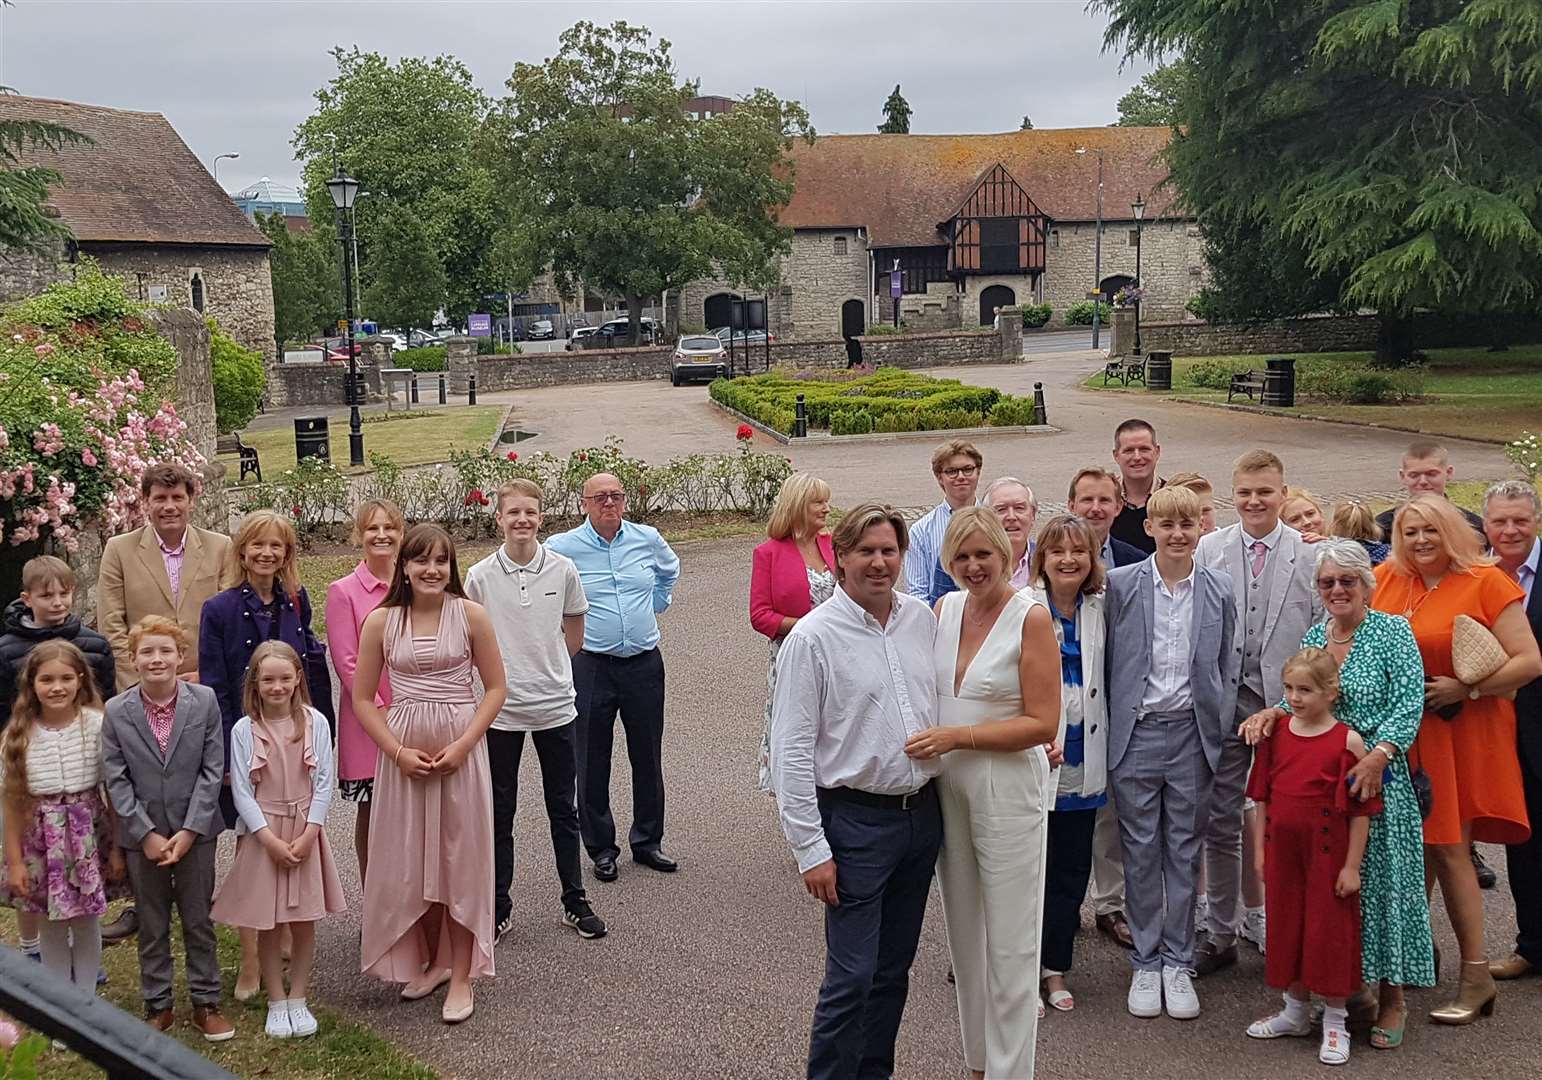 Gayle Turrell and Andy Thompson tie the knot at the Archbishop's Palace in Maidstone, with a maximum of 26 friends and relatives